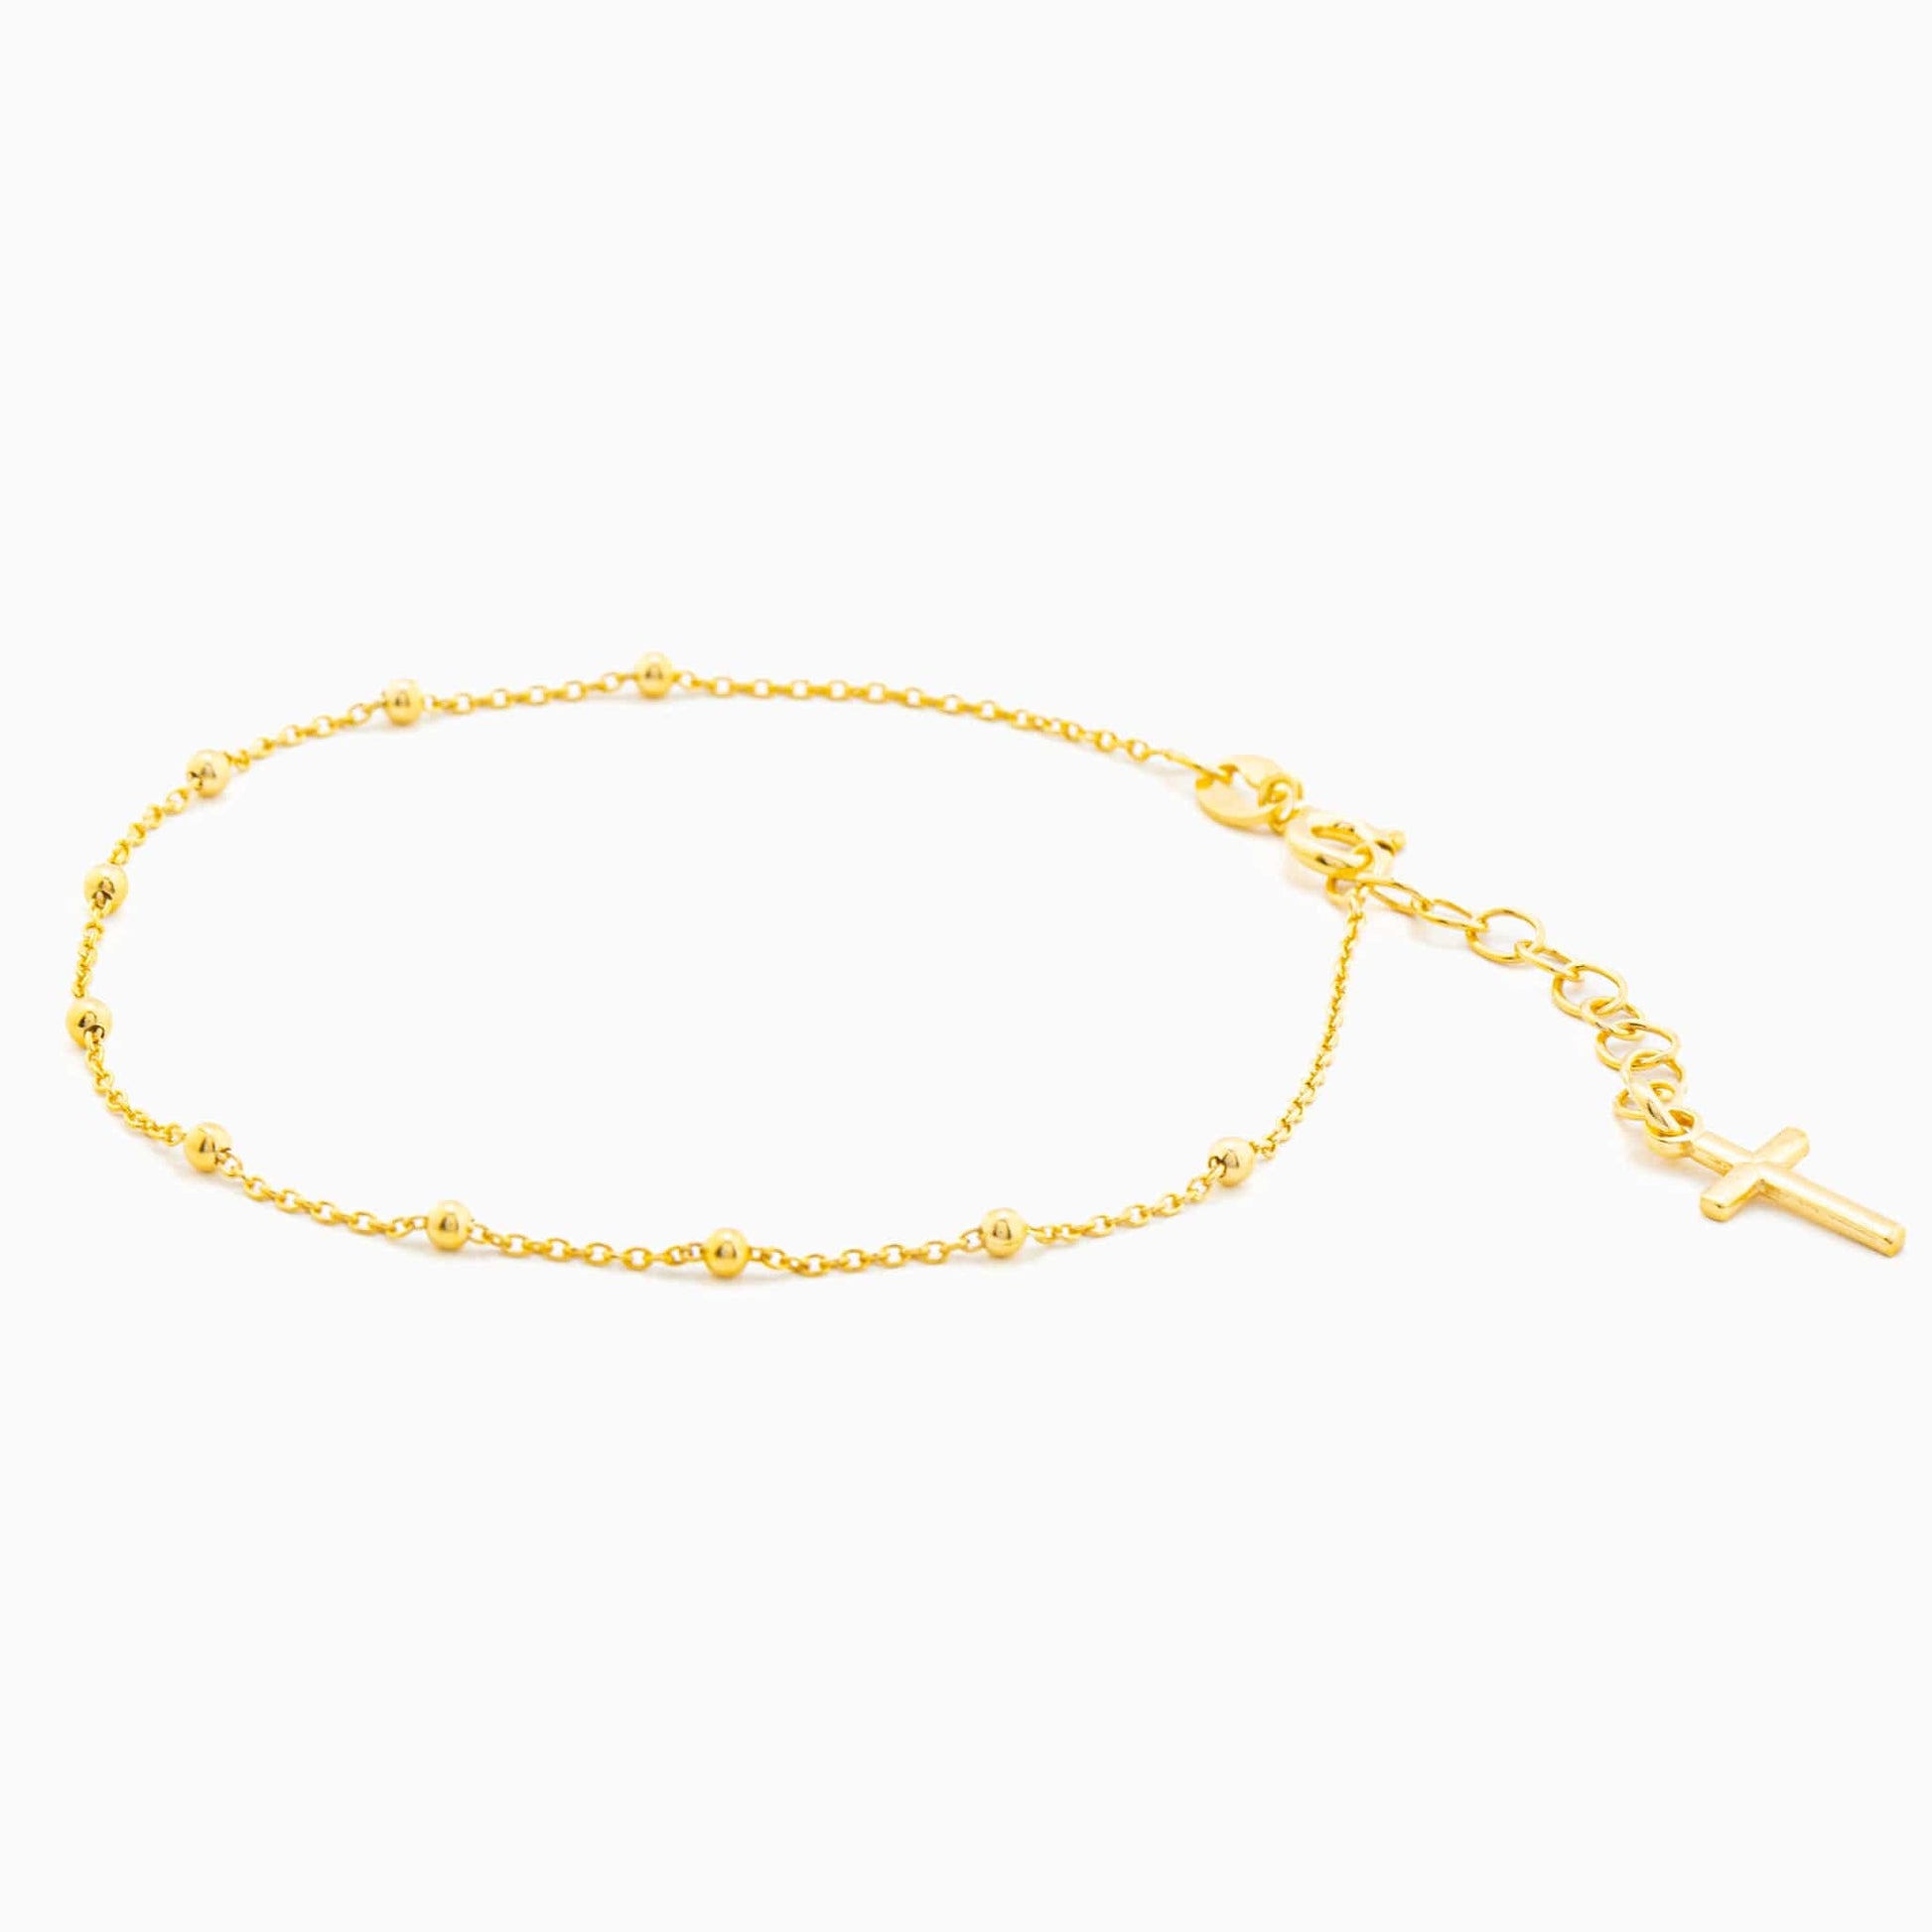 MONDO CATTOLICO Cm 18 (7.1 in) / Gold Rosary Bracelet With Cross